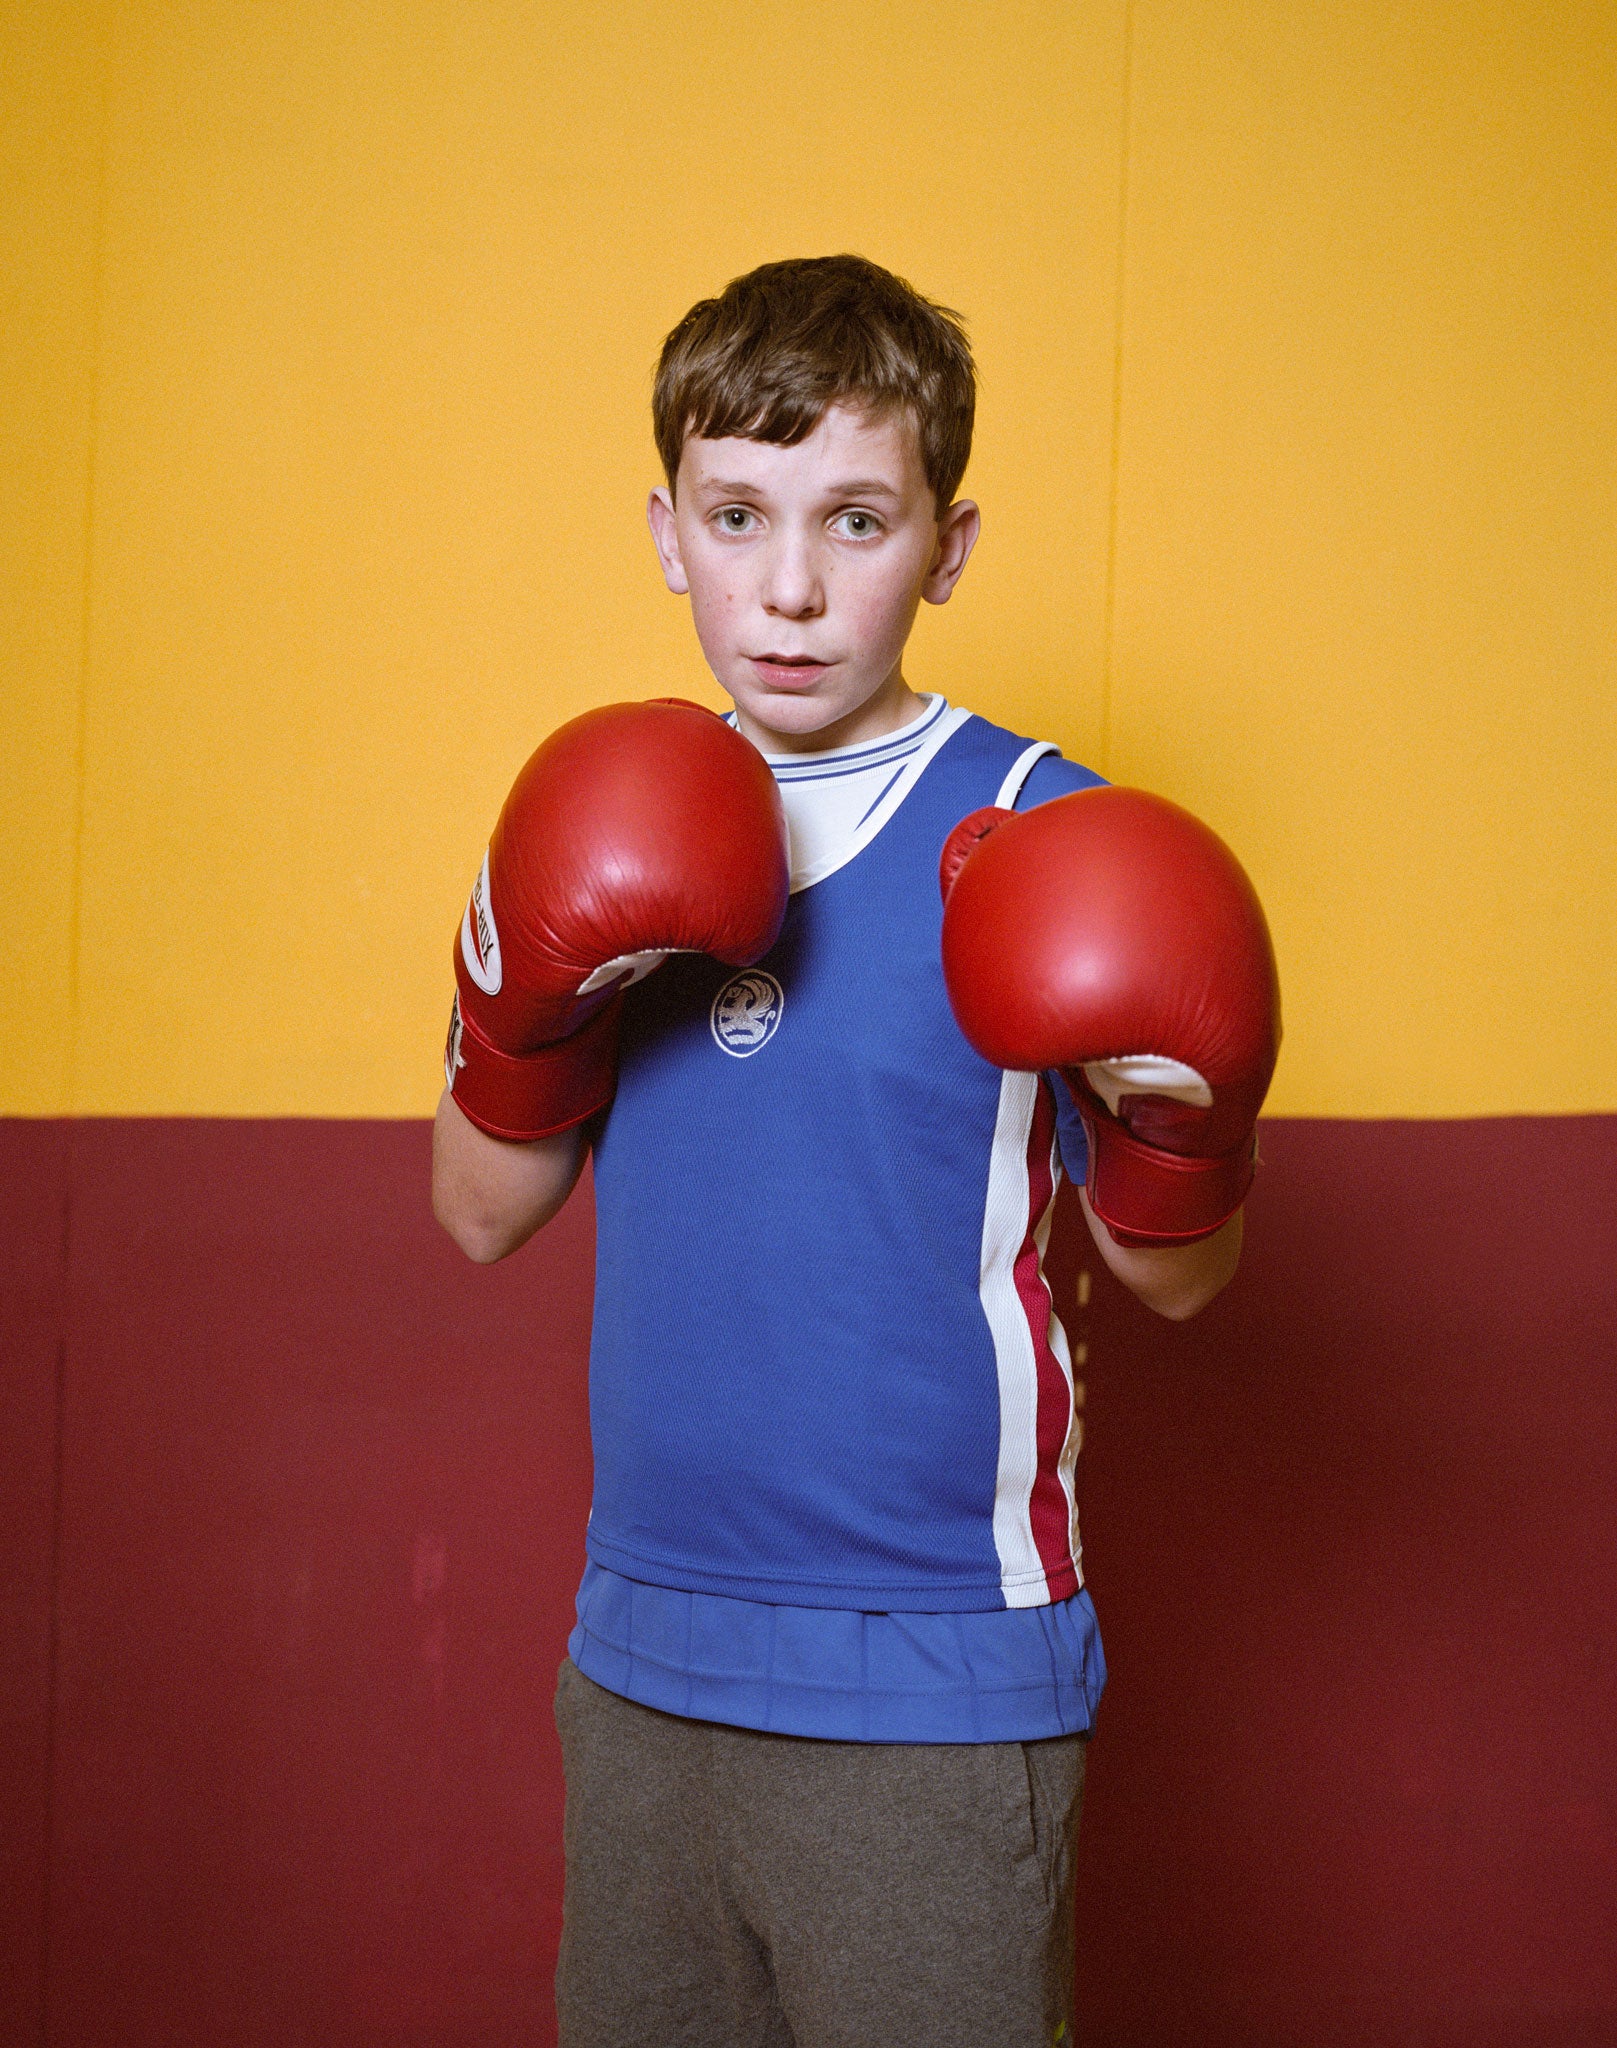 Frank photographed young boxers at the Wirral CP Boxing Club